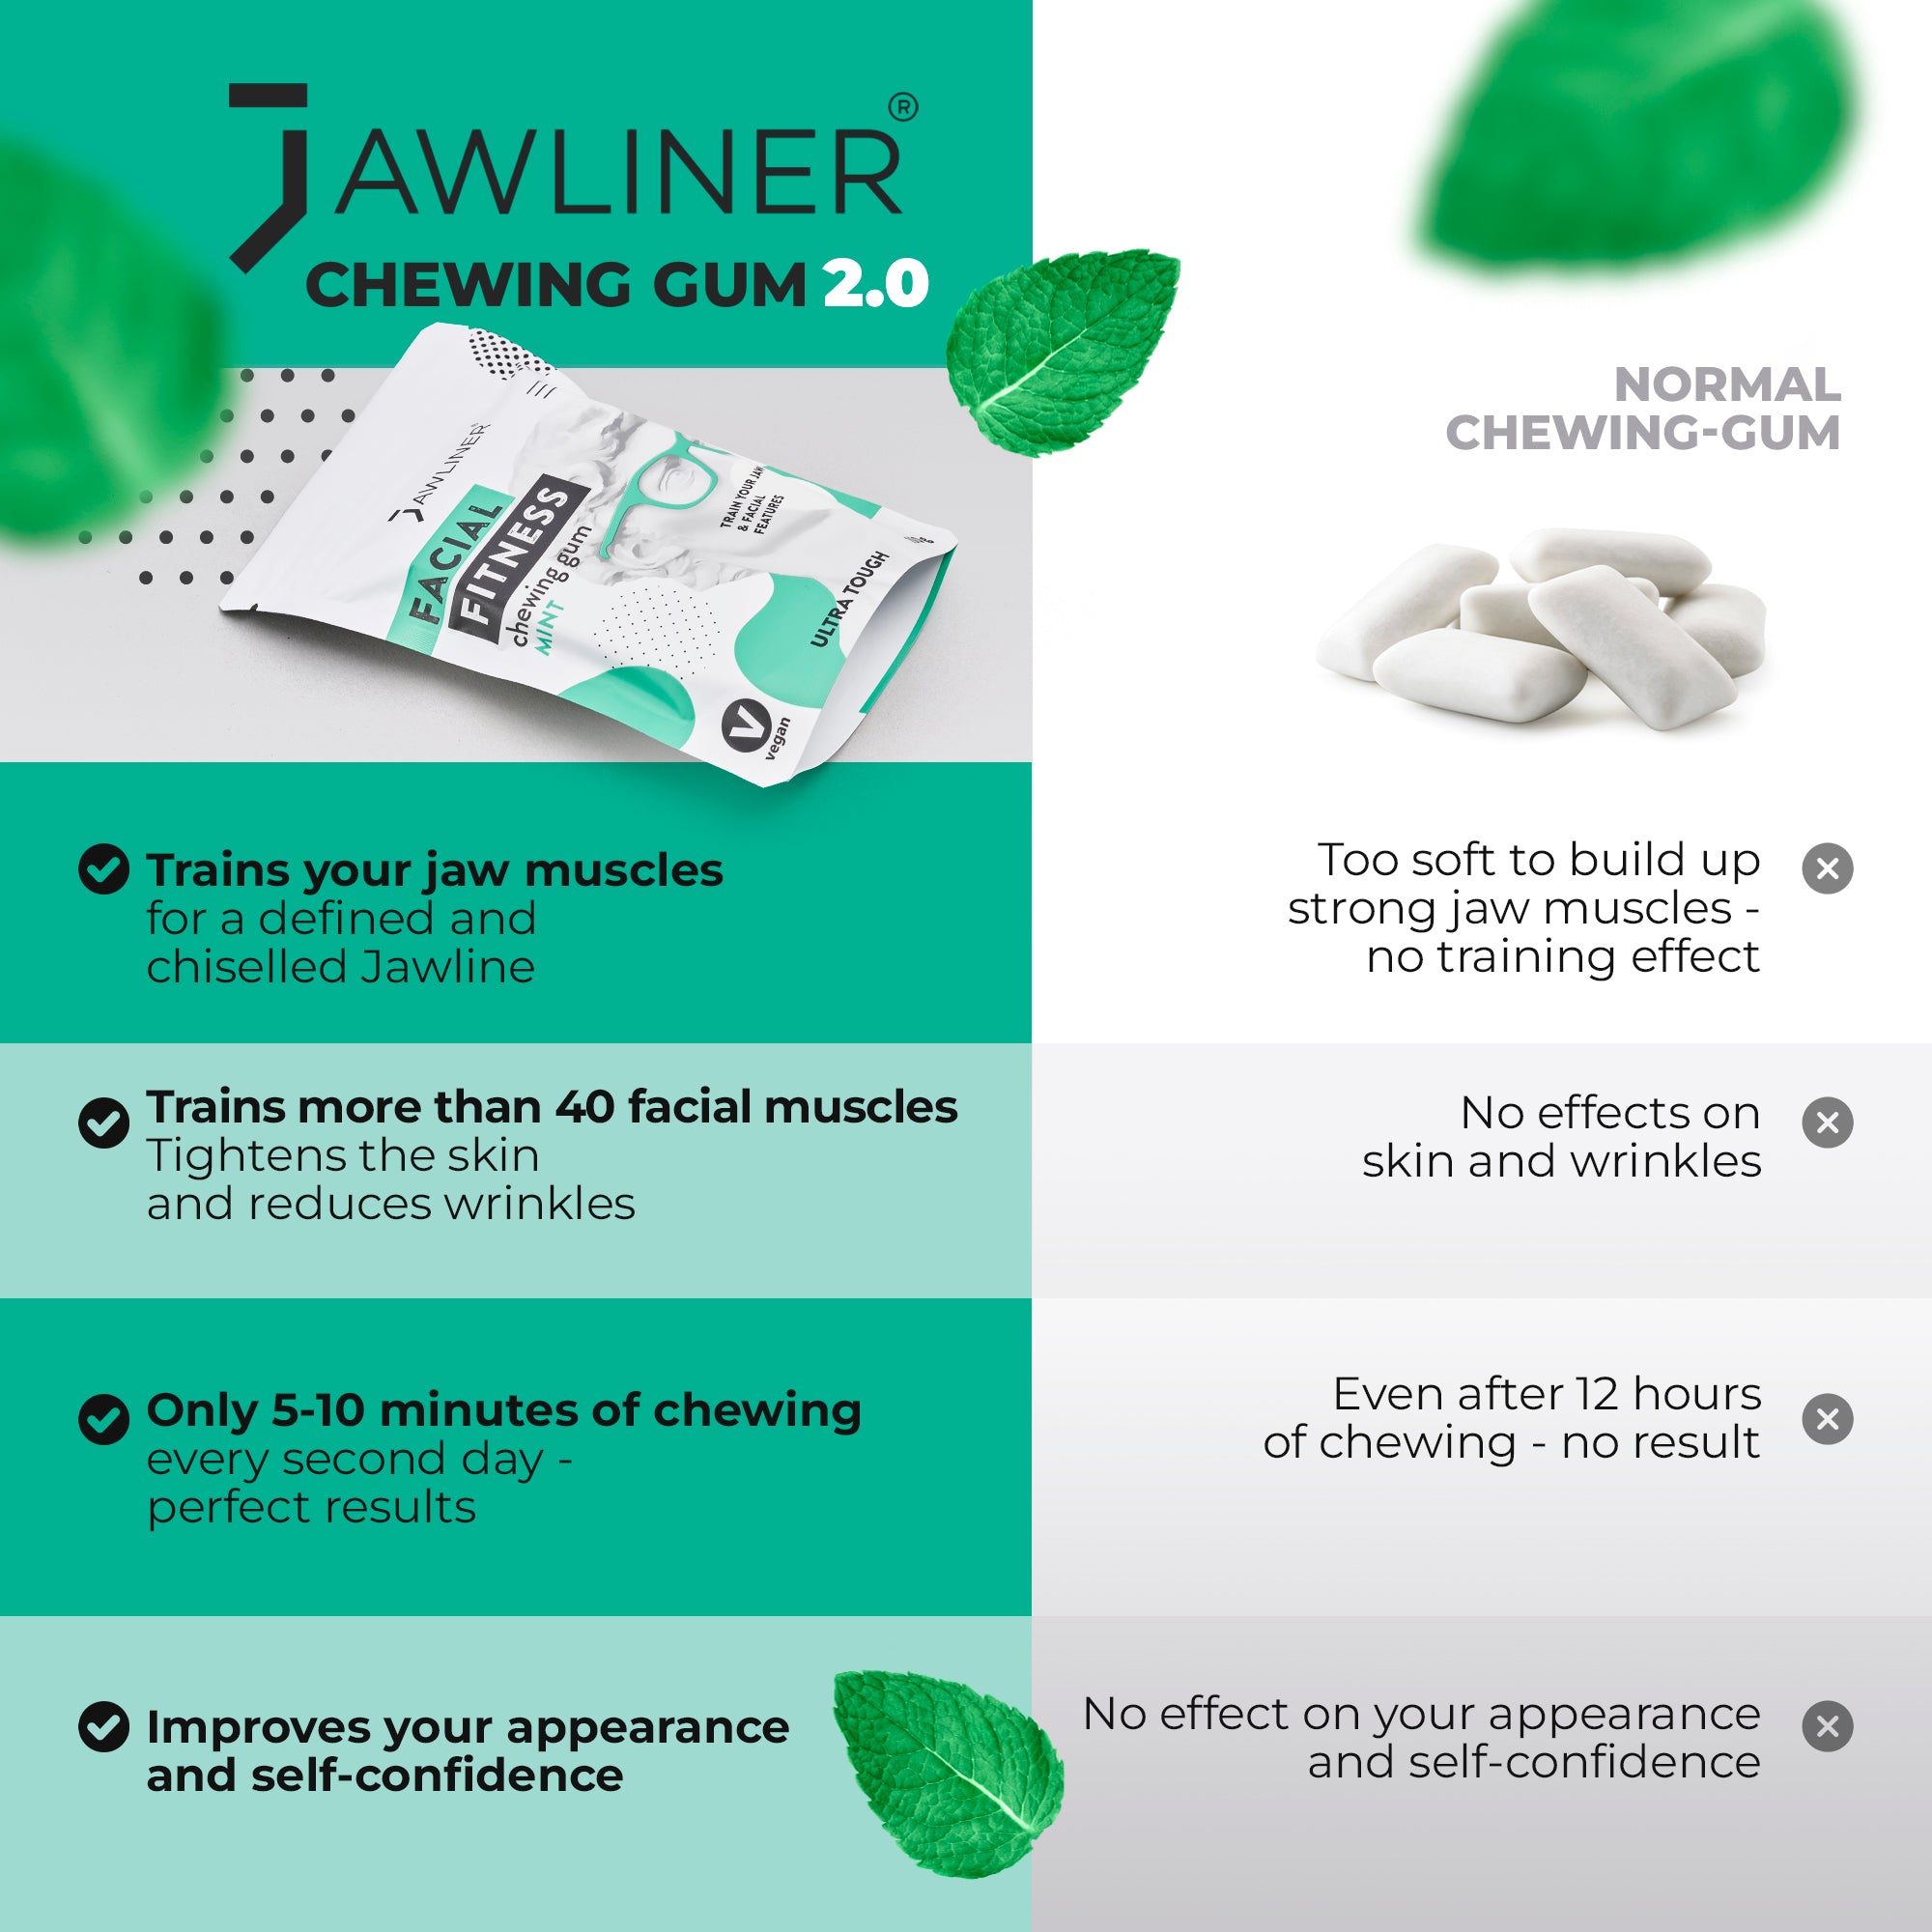 JAWLINER Fitness Chewing Gum (2 months pack) Jawline Sugar Free Mint Gum -  - Jawline Exerciser For Mewing And Shapen The Jaw - 15x Harder Than Regular